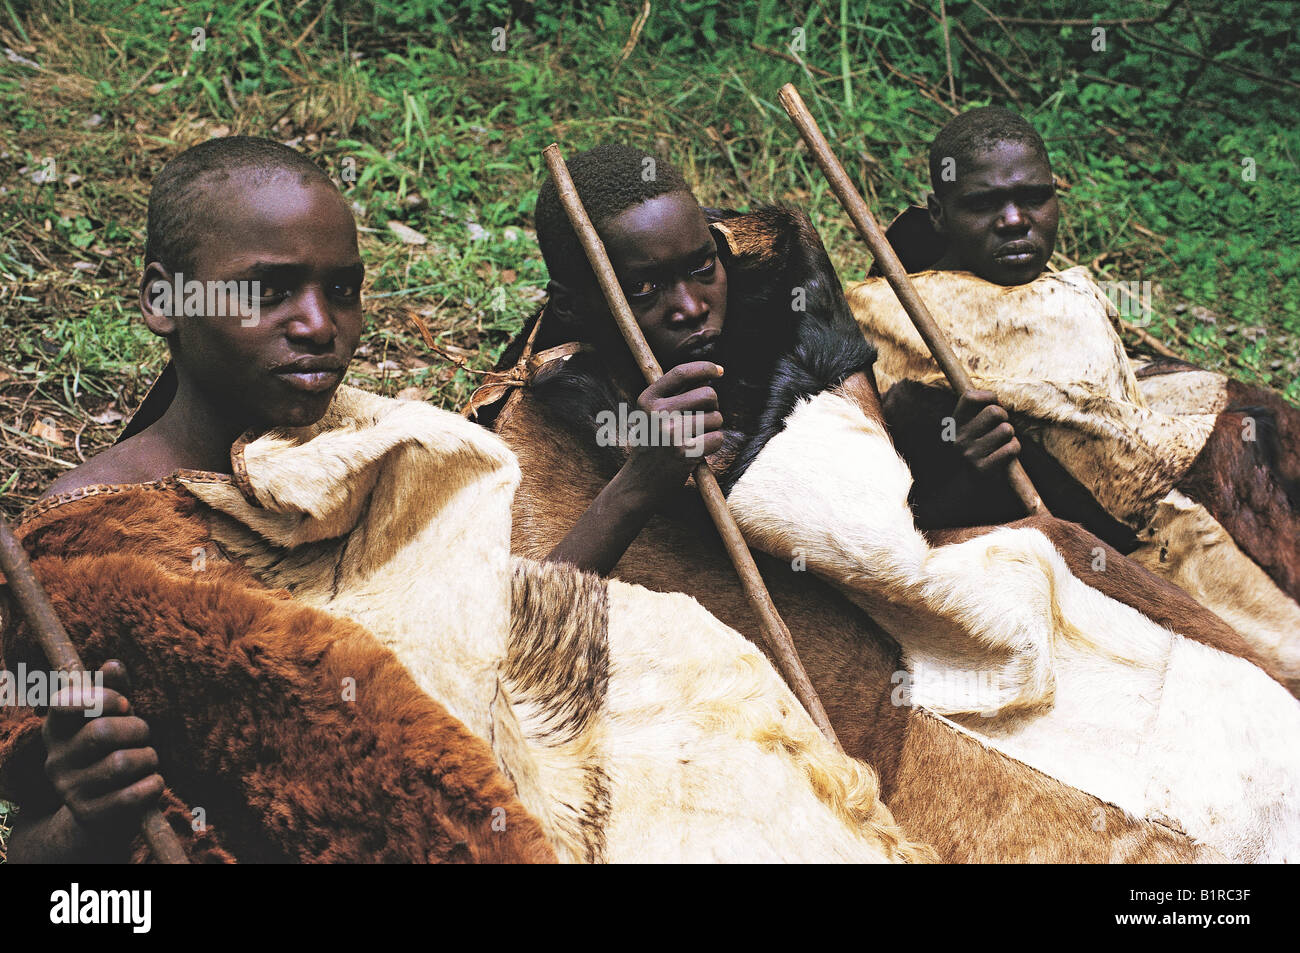 Three Nandi youths in seclusion after circumcision and rite of passage into manhood Kenya East Africa Stock Photo